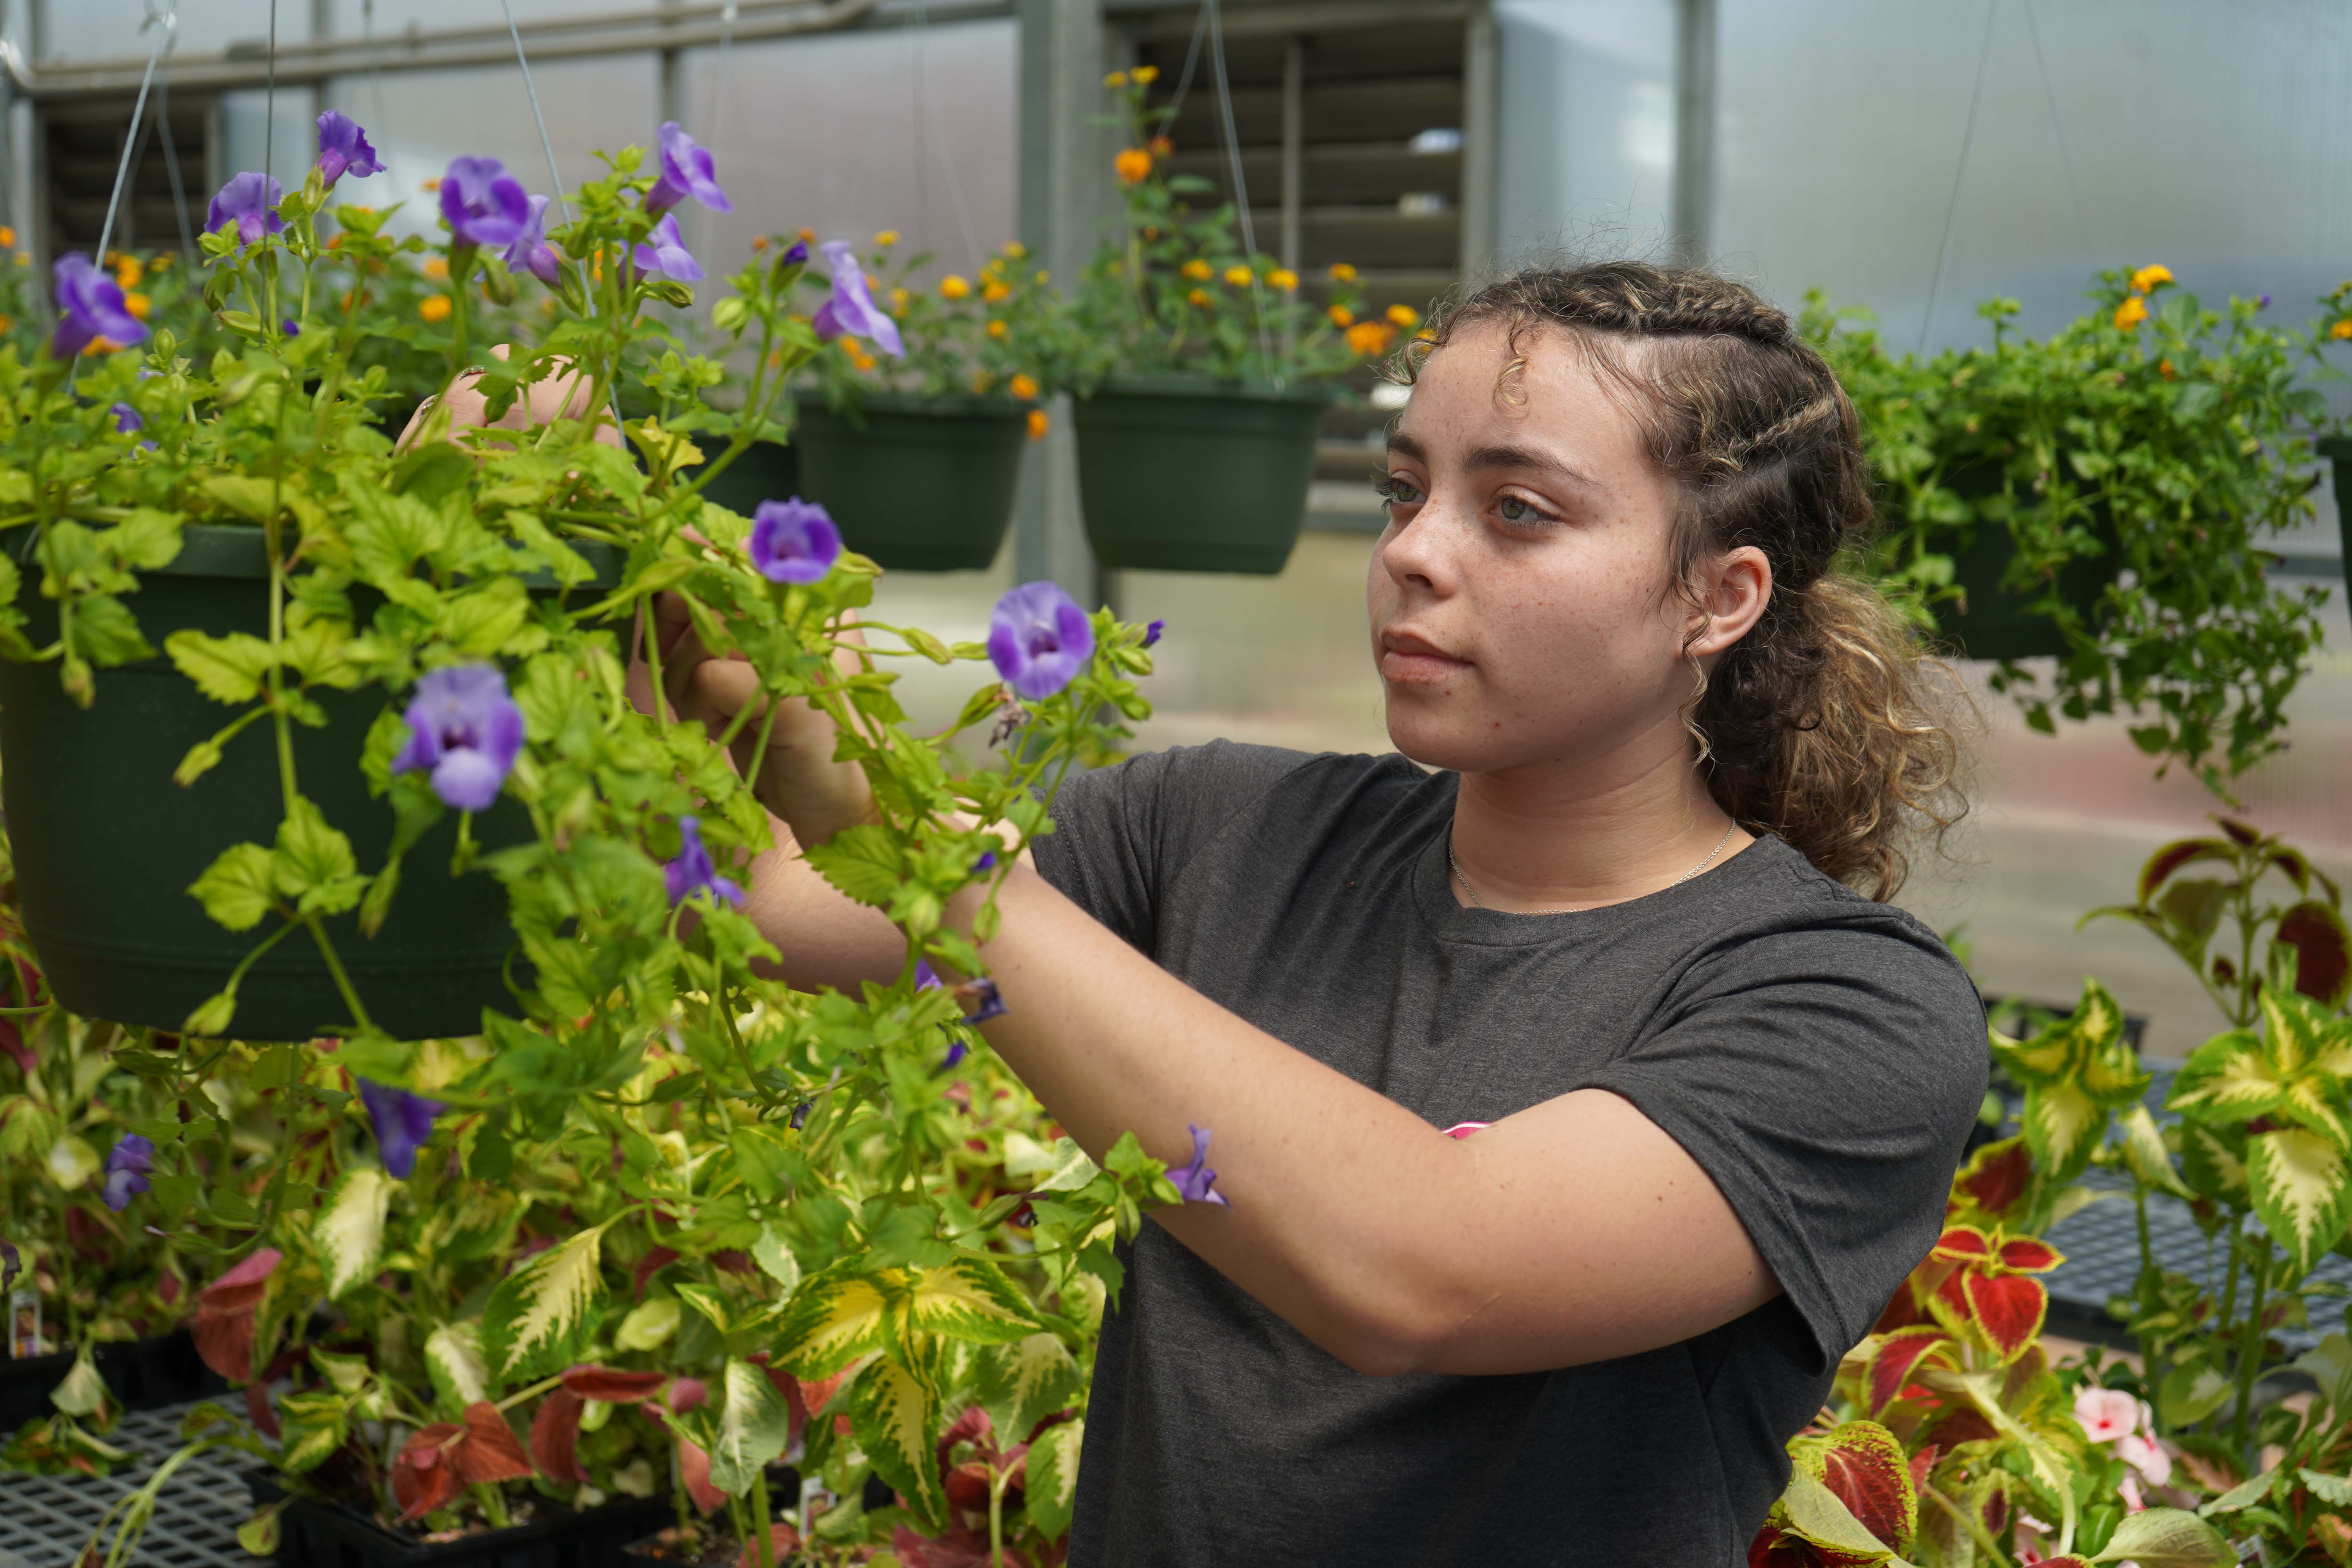 Shelby Madden, a GNTC Horticulture student from LaFayette, tends to plants during the annual Spring Plant Sale. Madden has a greenhouse and small-scale plant and vegetable farm; she is starting a business named “Maddhouse Farm.”